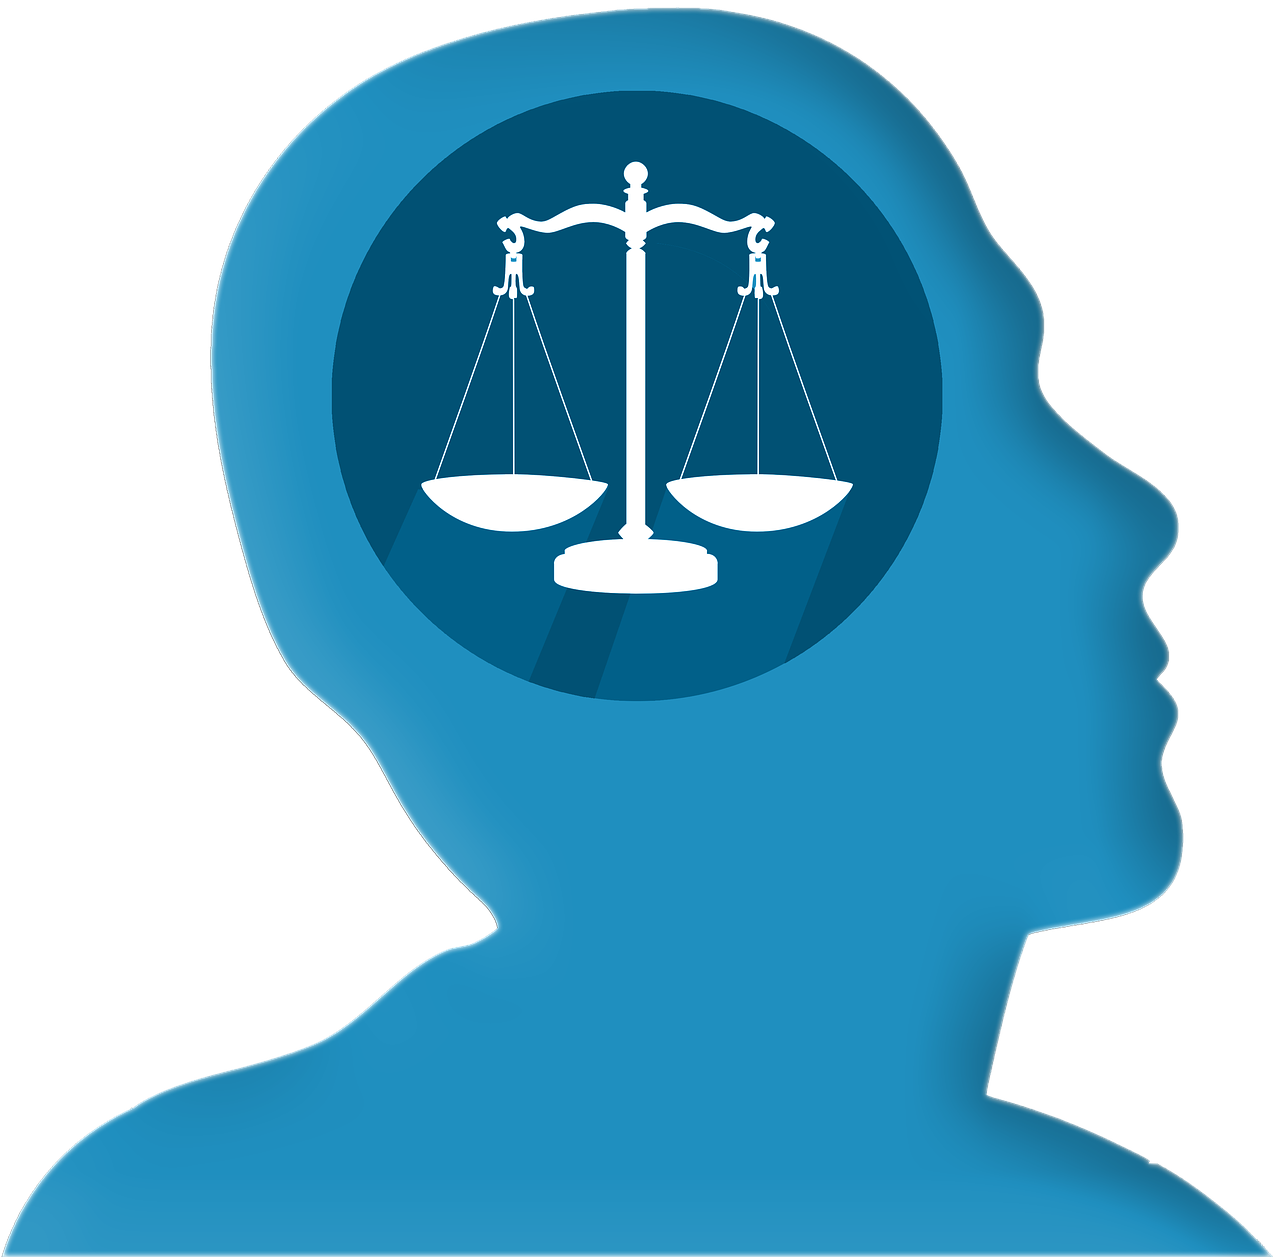 Silhouette of a human with the Scales of Justice where the brain would be